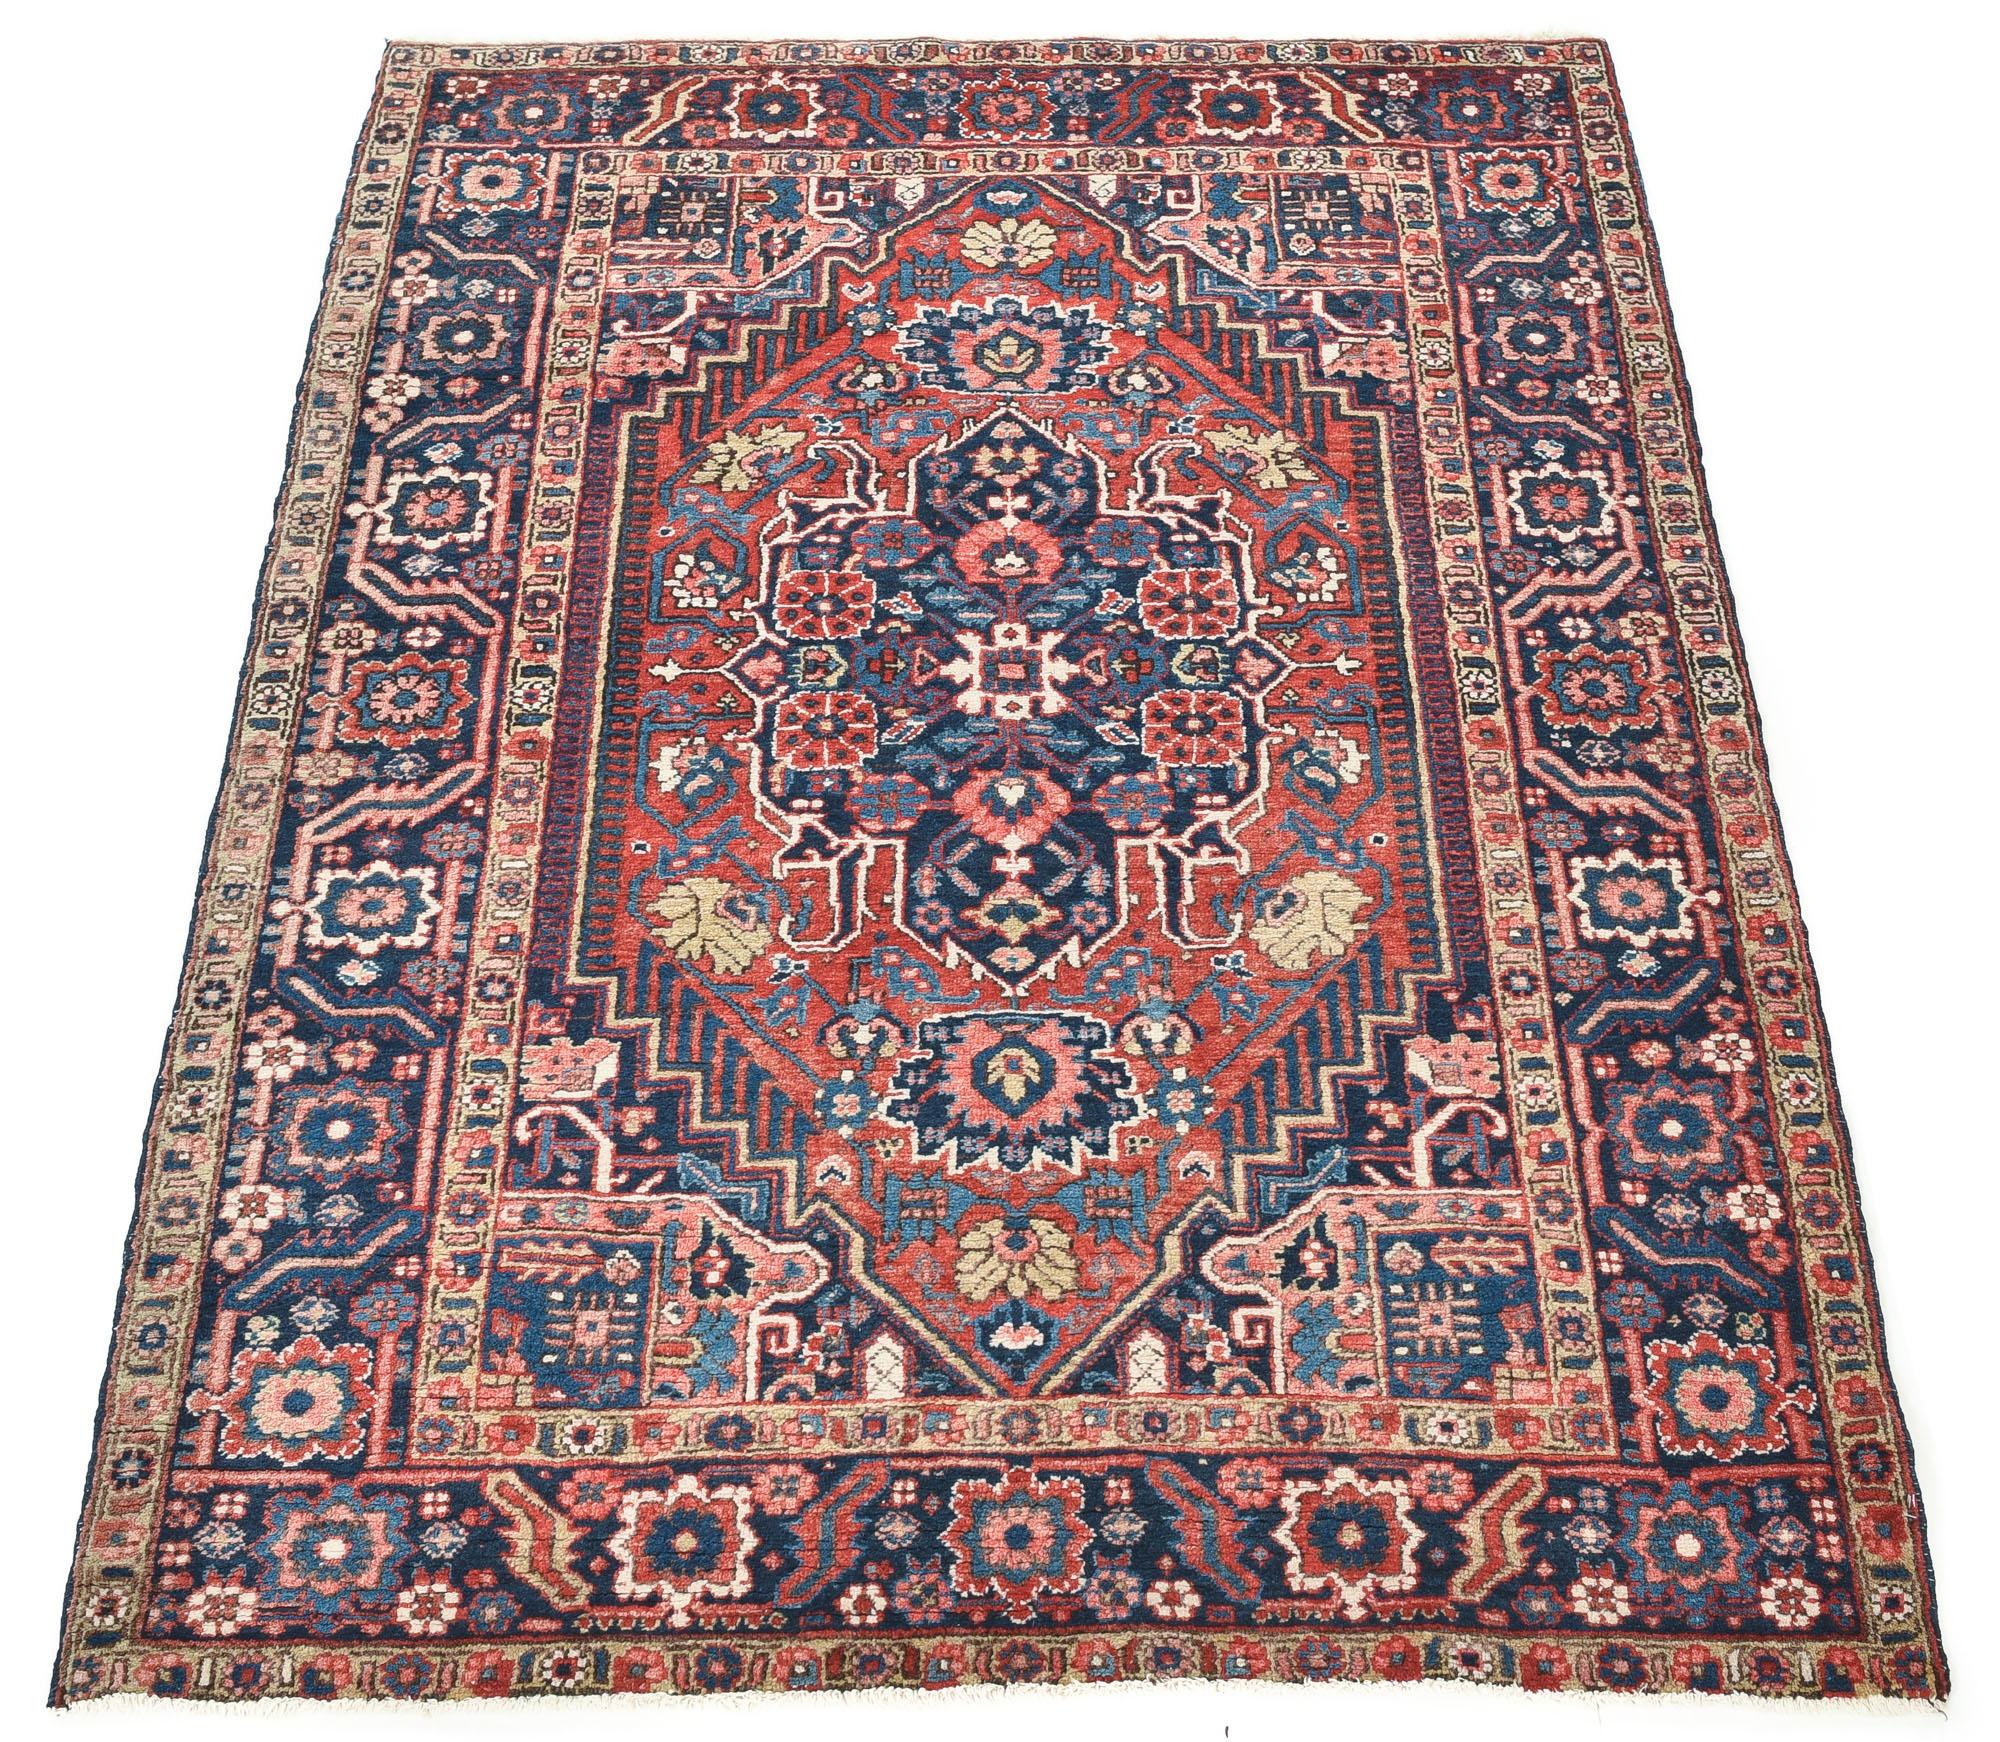 Semi-antique Heriz rug handwoven with wool in an elegant artistic design filled with flowers and traditional Persian symbols. The bold colors and central medallion are very typical of a Heriz rug. Size: 4'8 x 6'5.